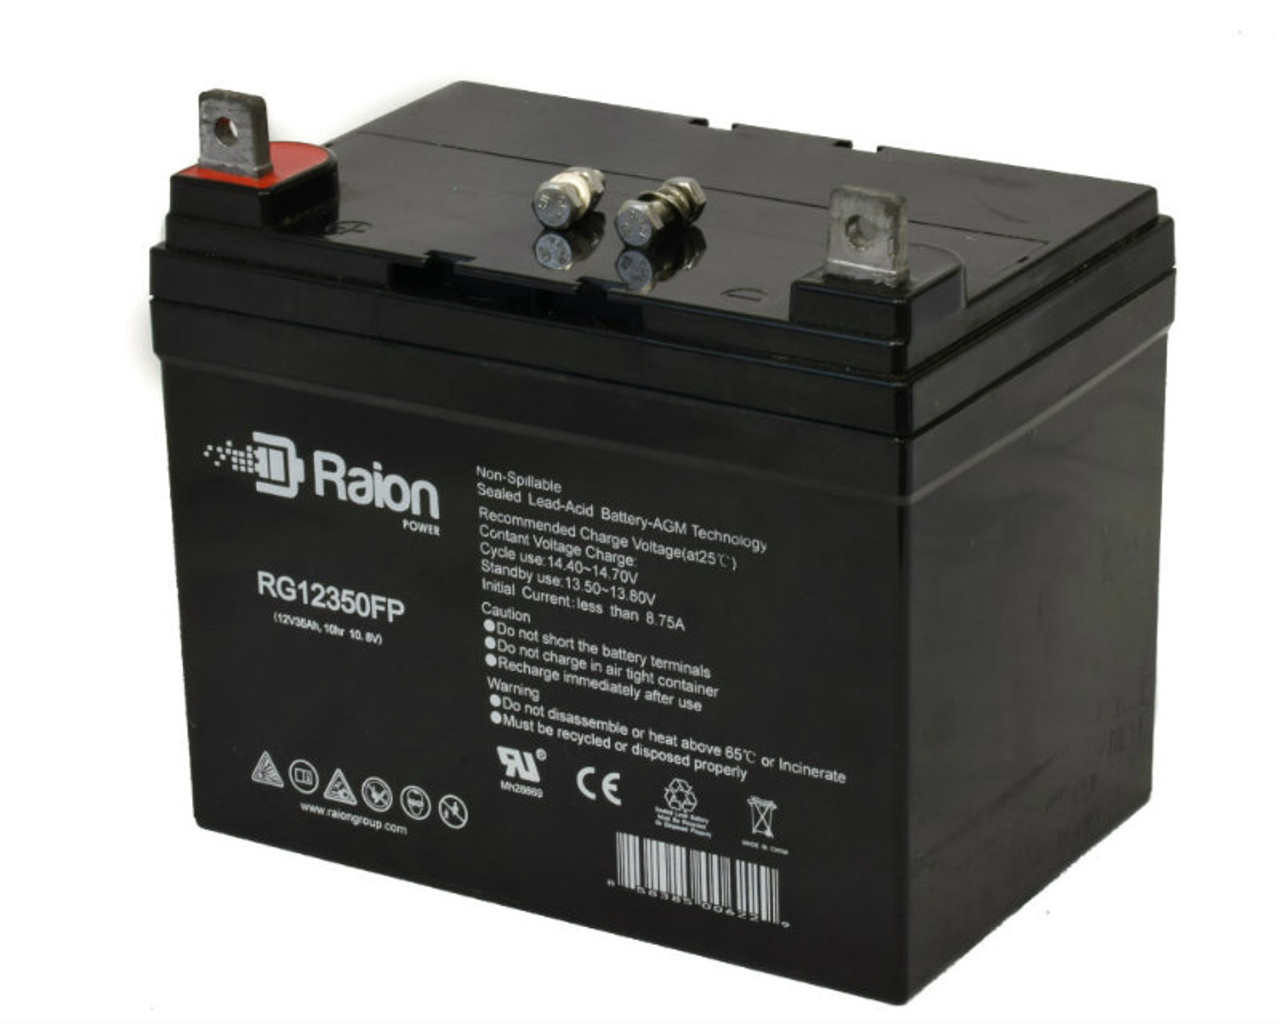 Raion Power Replacement 12V 35Ah RG12350FP Battery for Sureway SW-1023